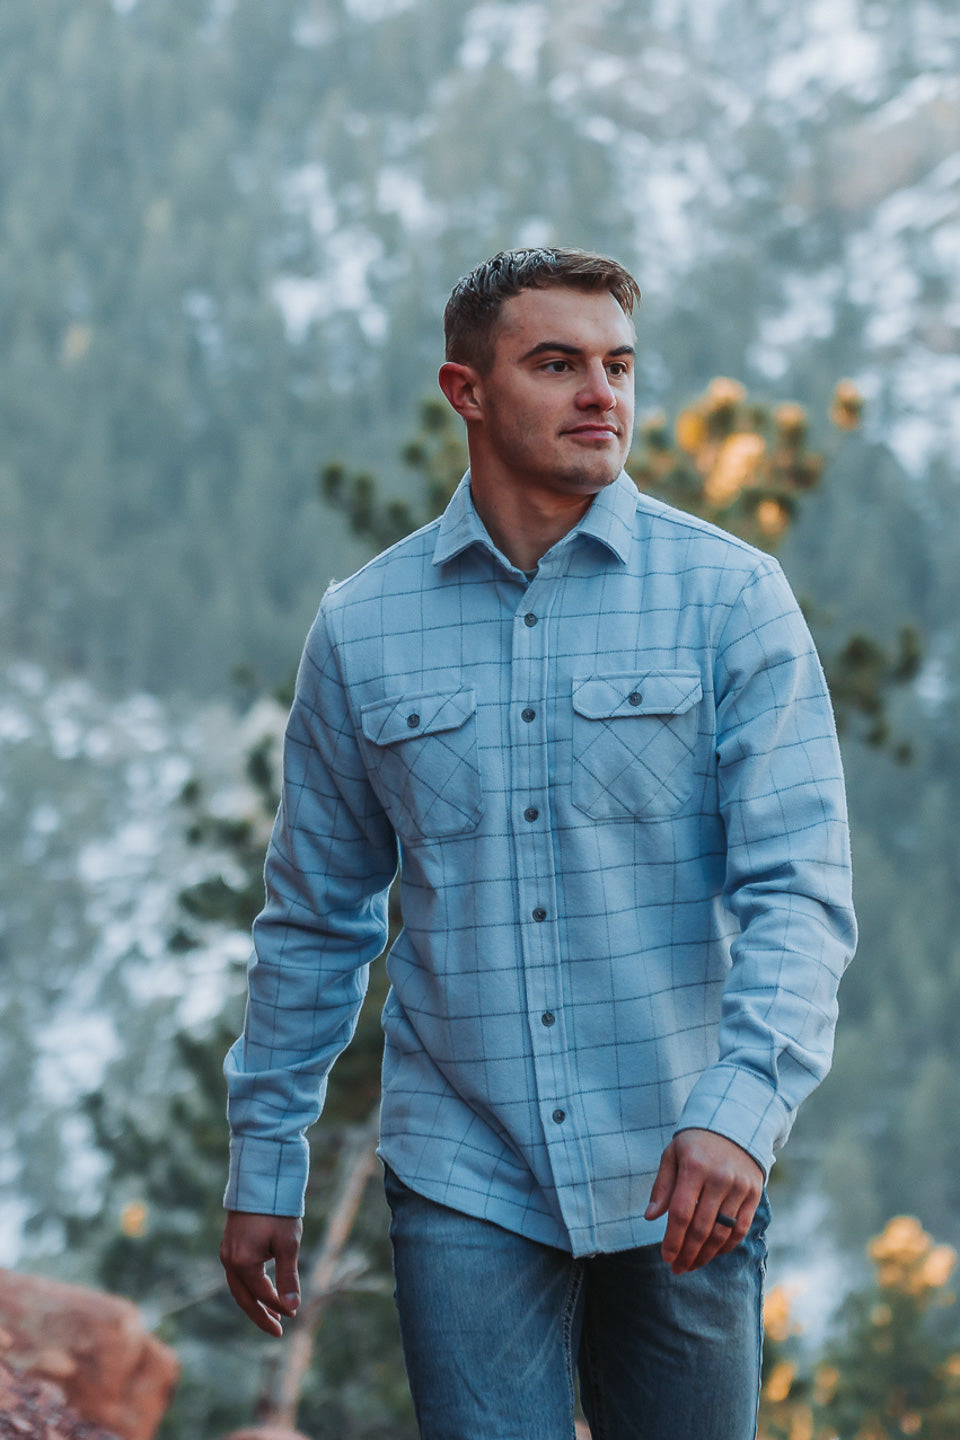 Heavywelght Flannel Shirt for Men by Muskox Flannels, Thick 100% Cotton Flannel Shirt in Light Blue